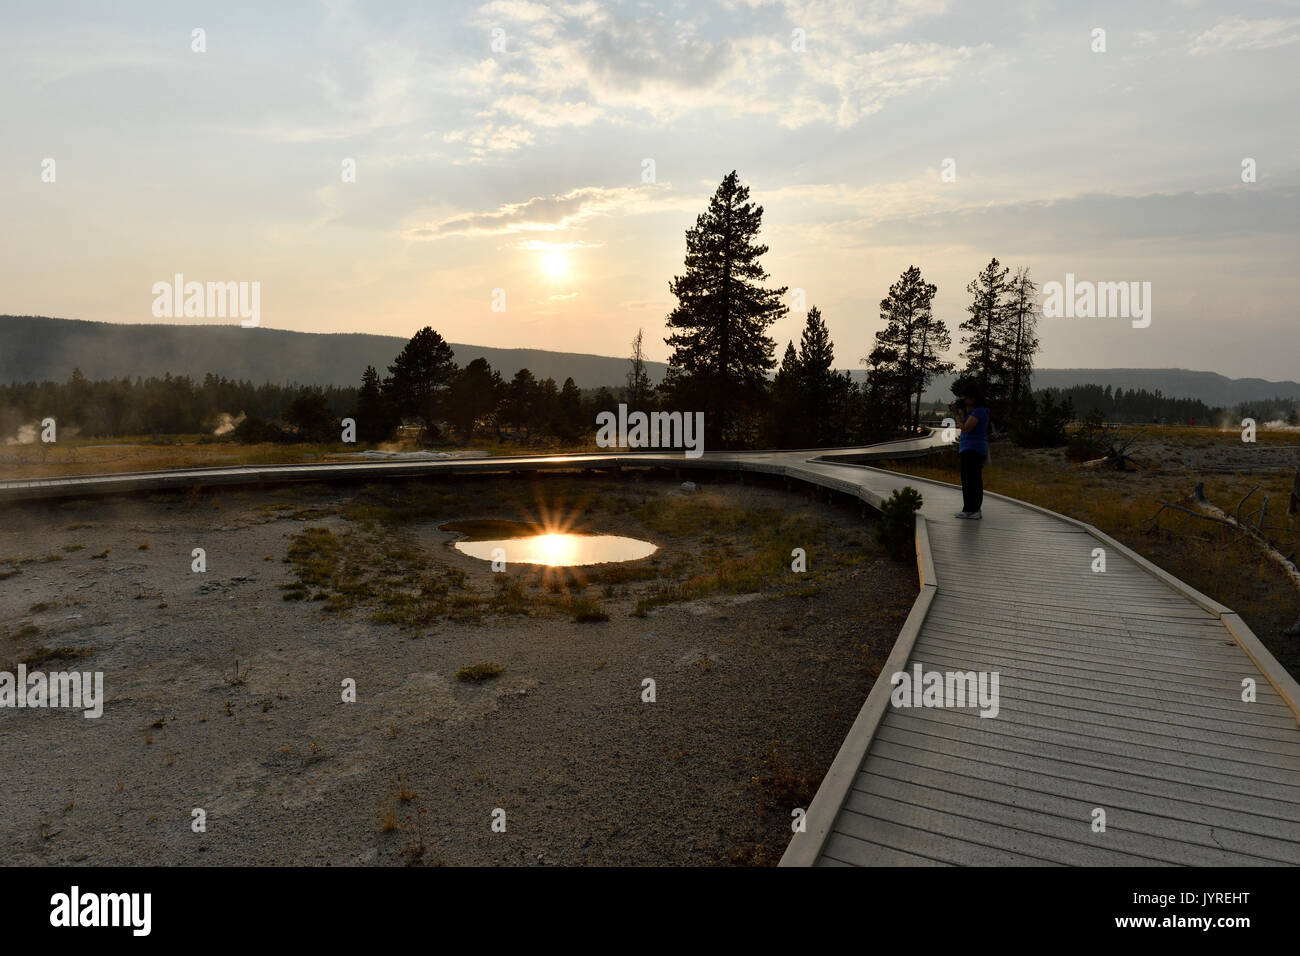 Les geysers de Yellowstone Banque D'Images